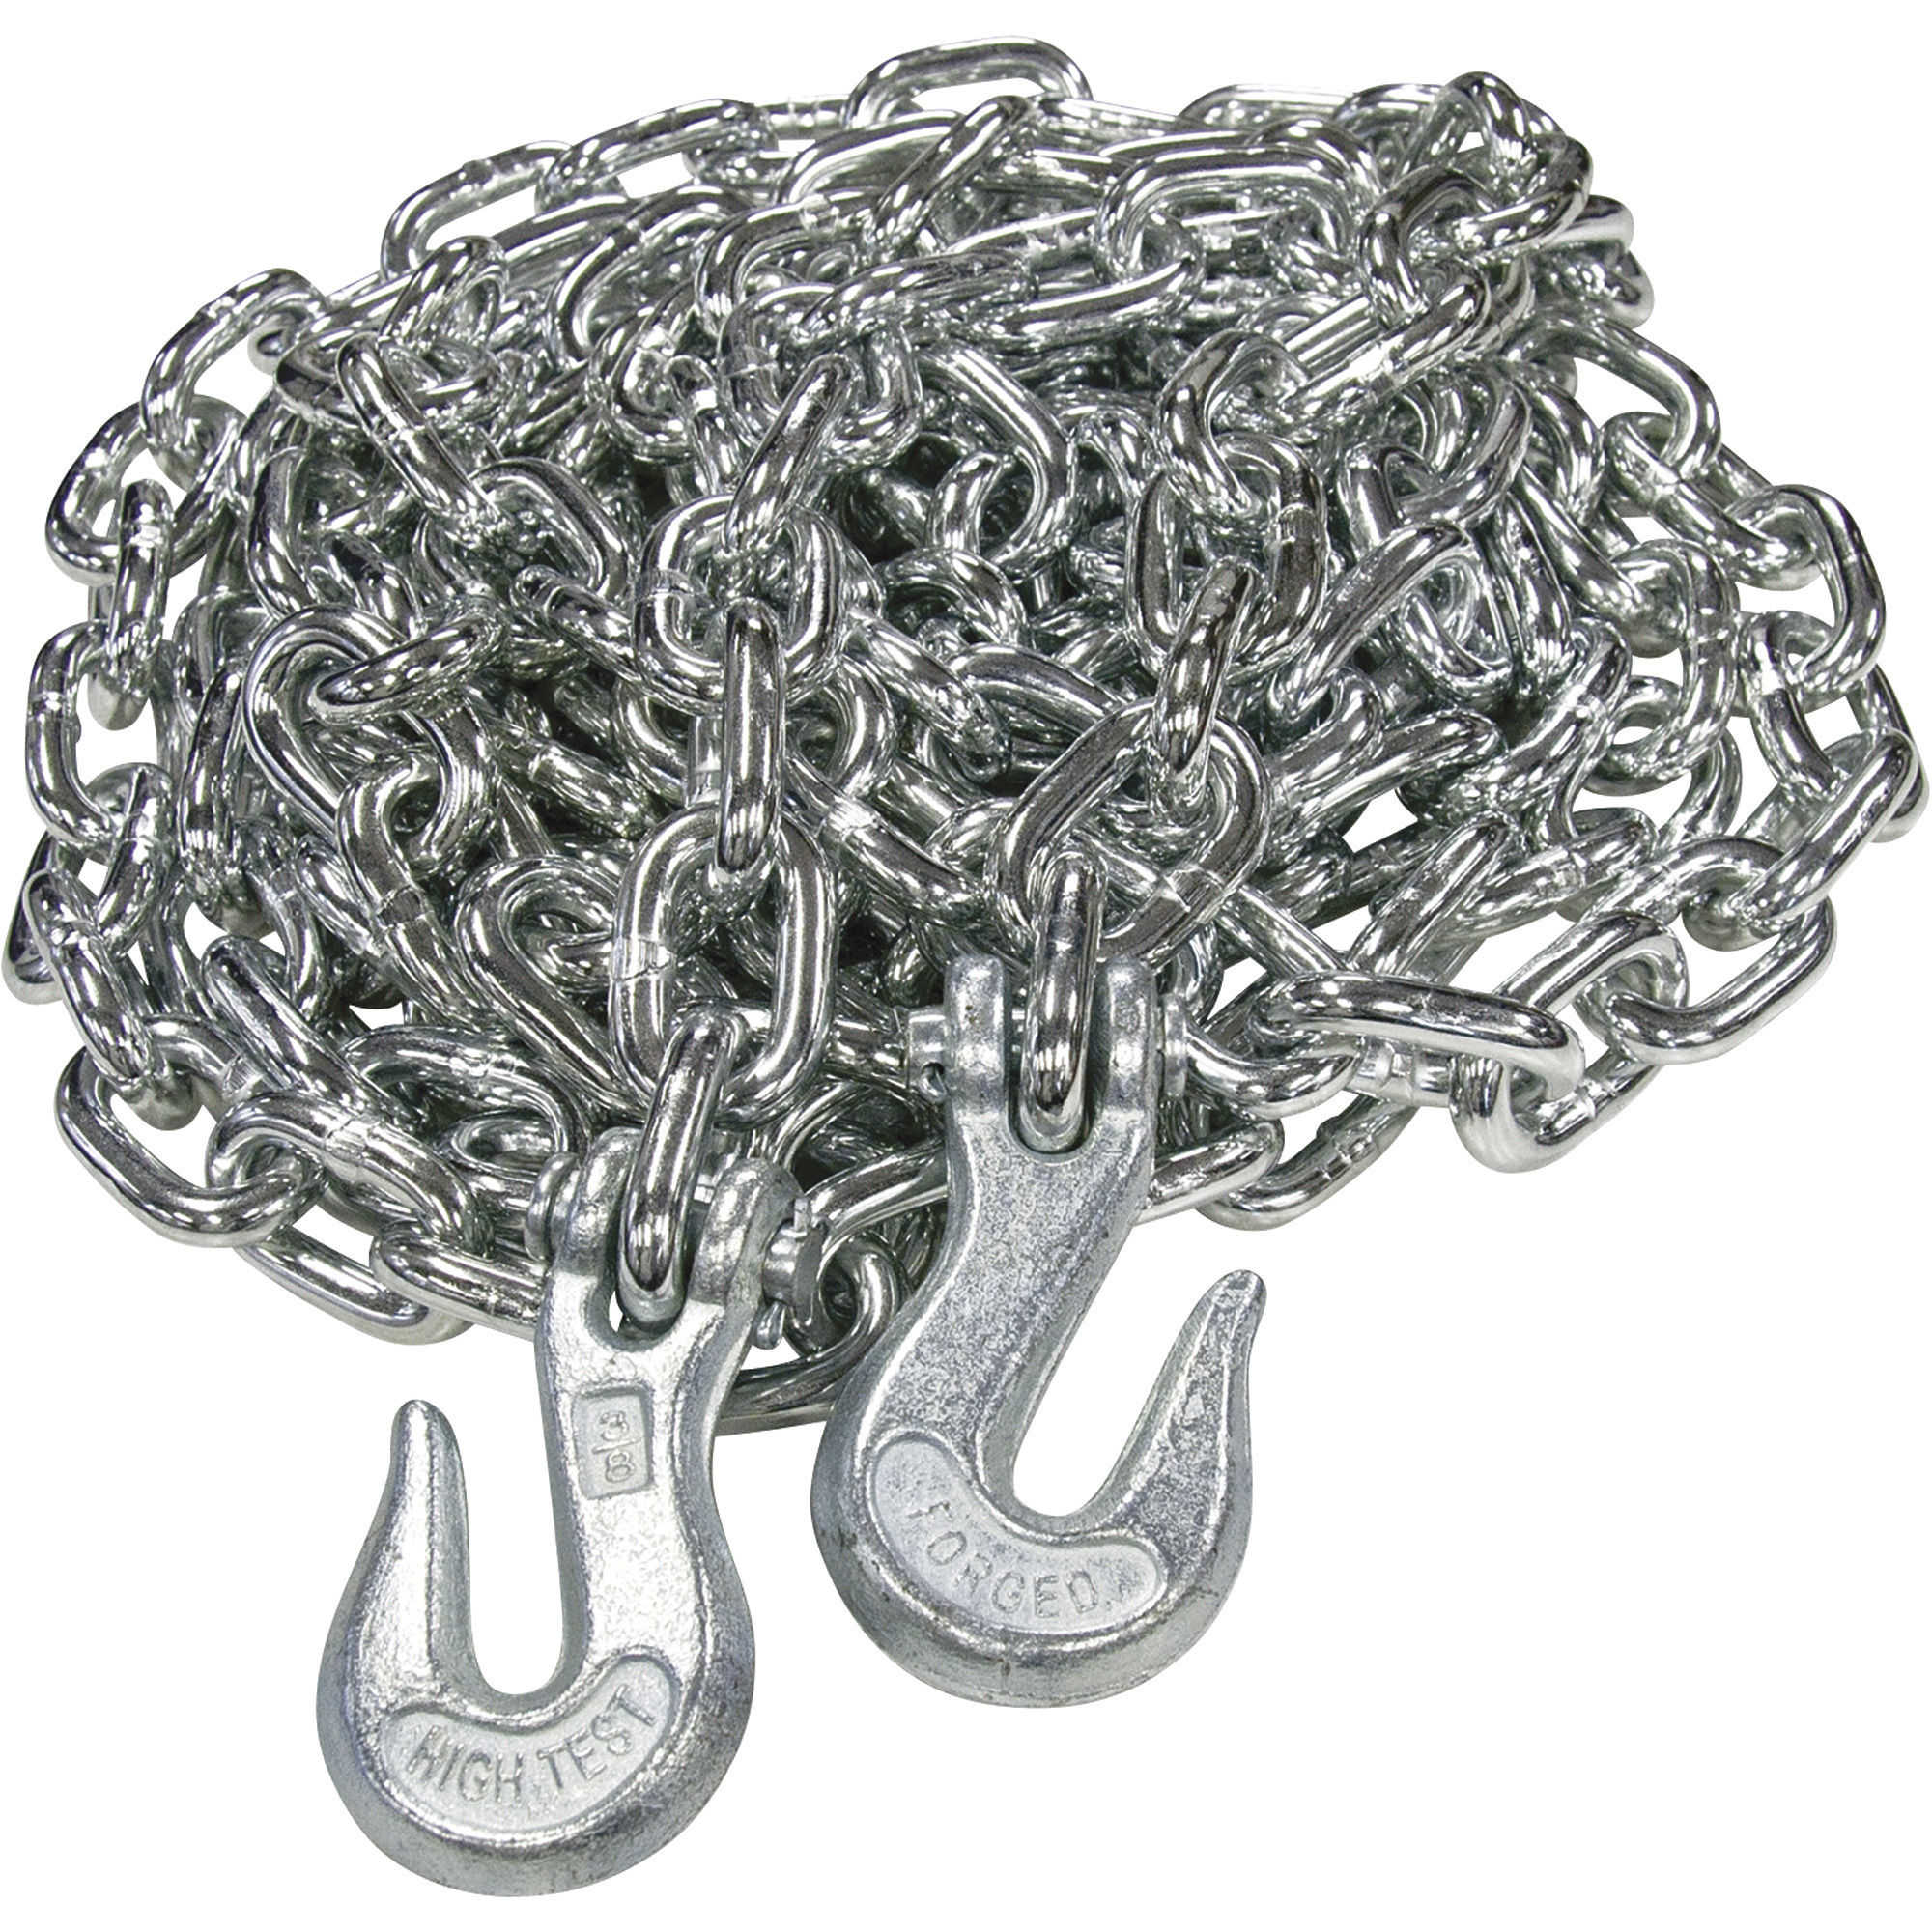 MIBRO High-Strength Tow Chain, 3/8Inch x 16ft., Model 426920